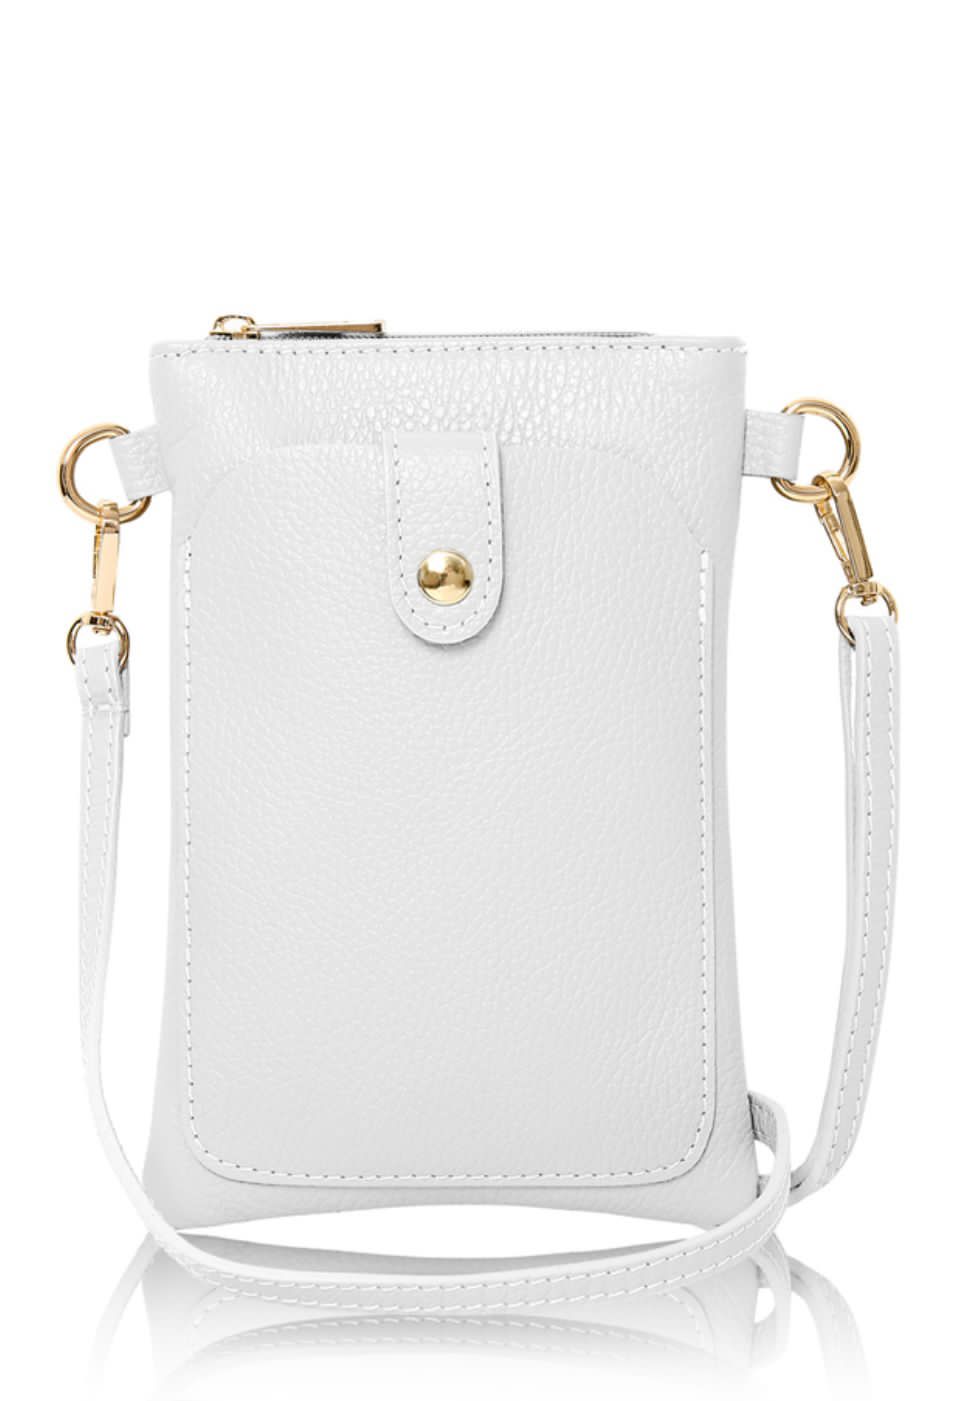 Leather crossover bag - white